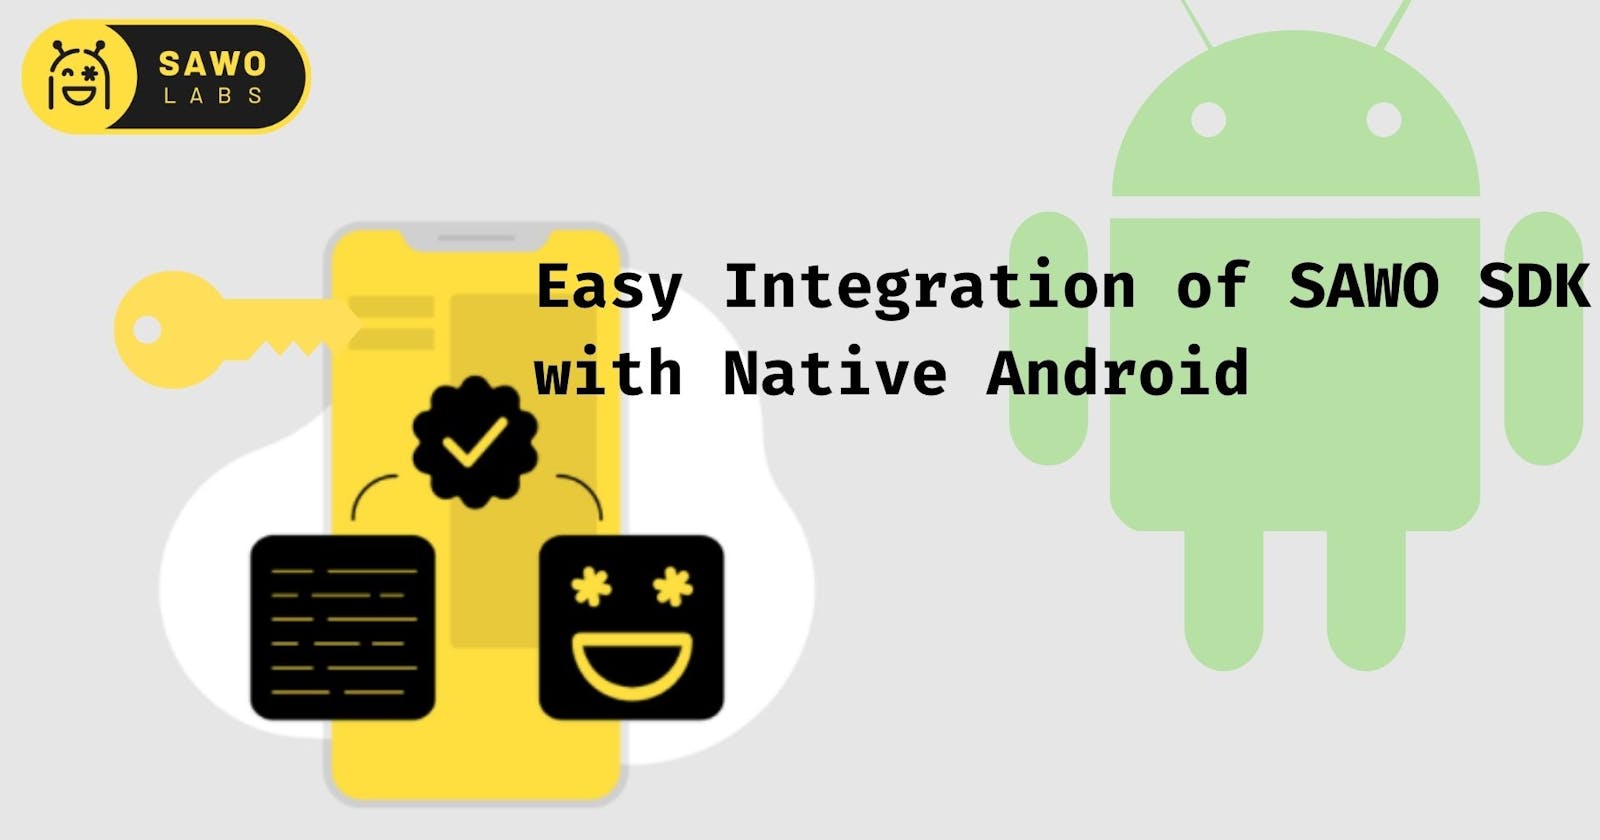 Easy Integration of SAWO SDK with Native Android